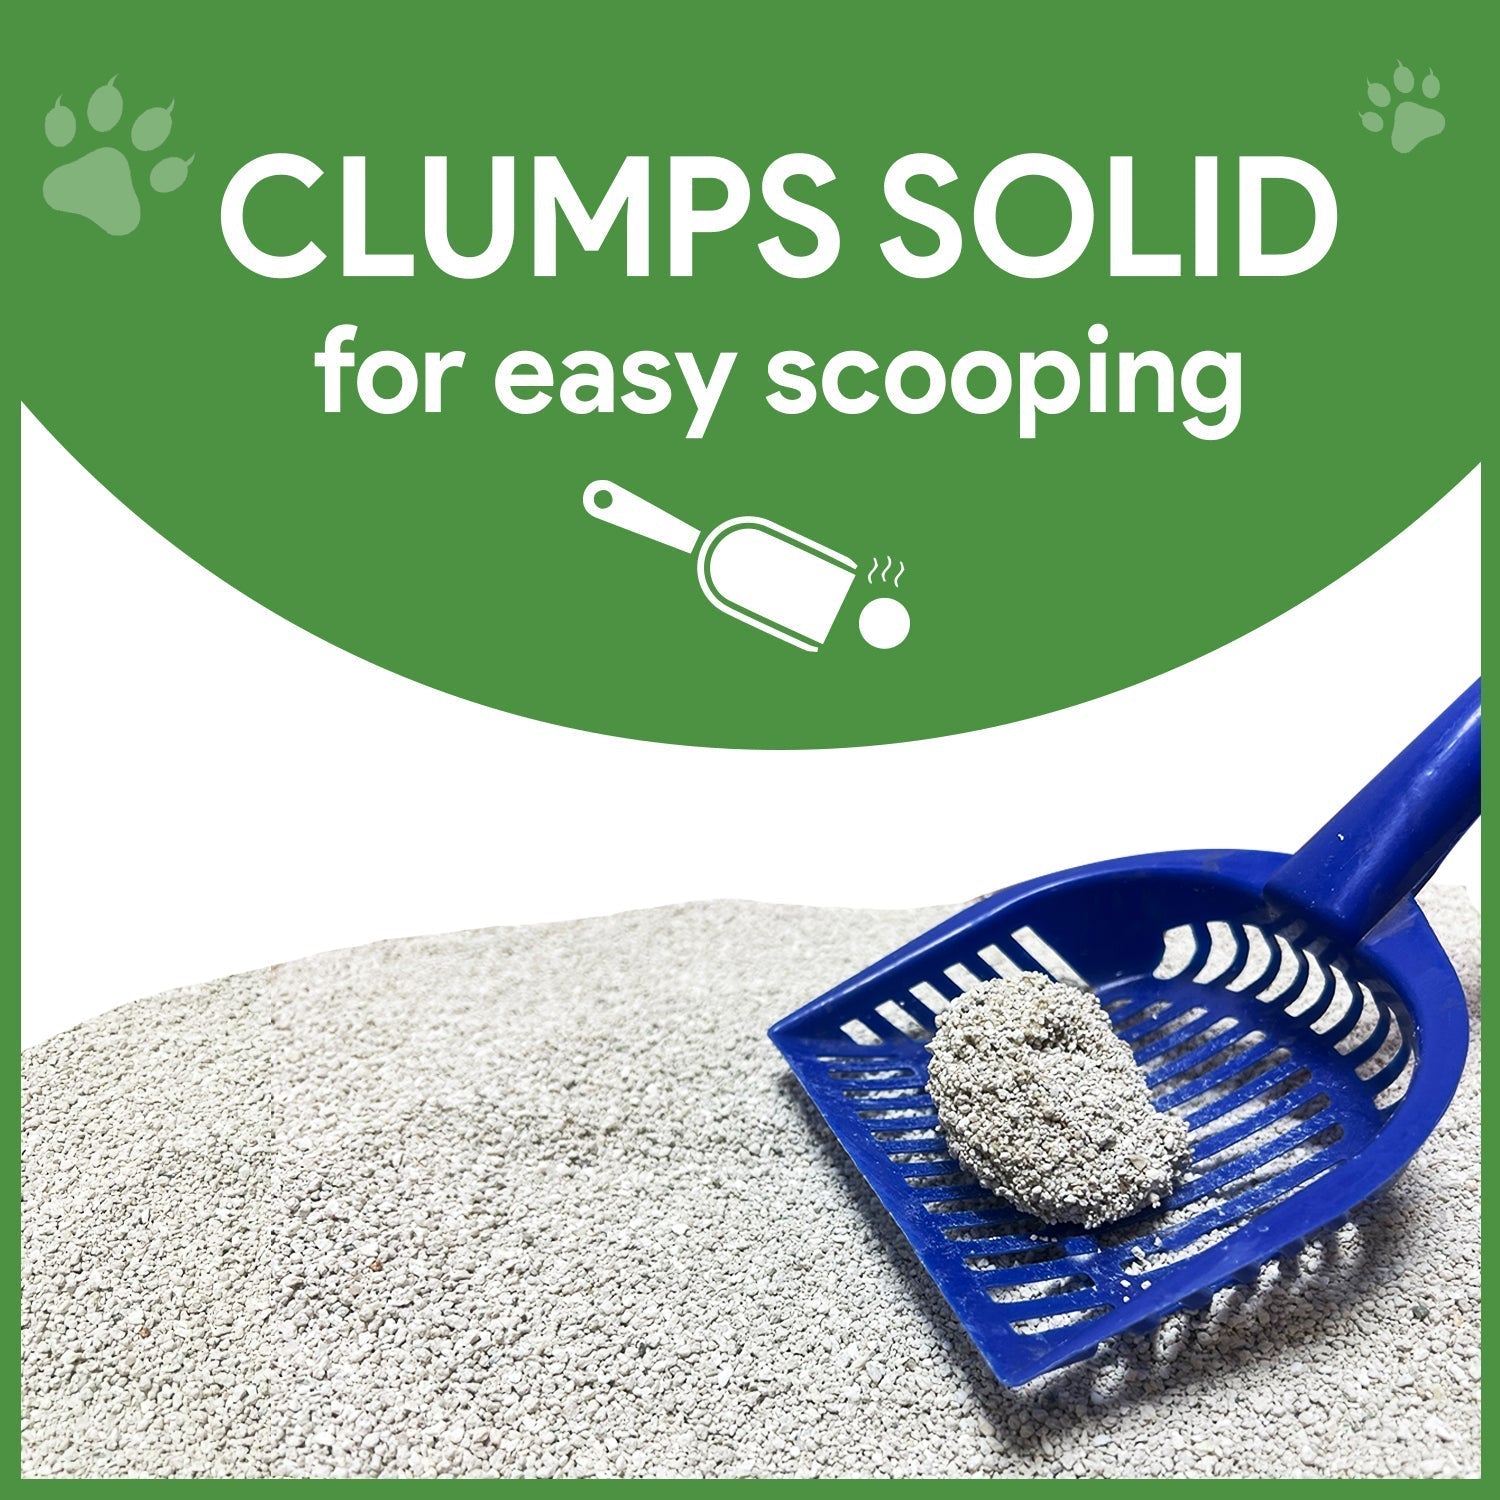 cat litter clump solid for easy scooping